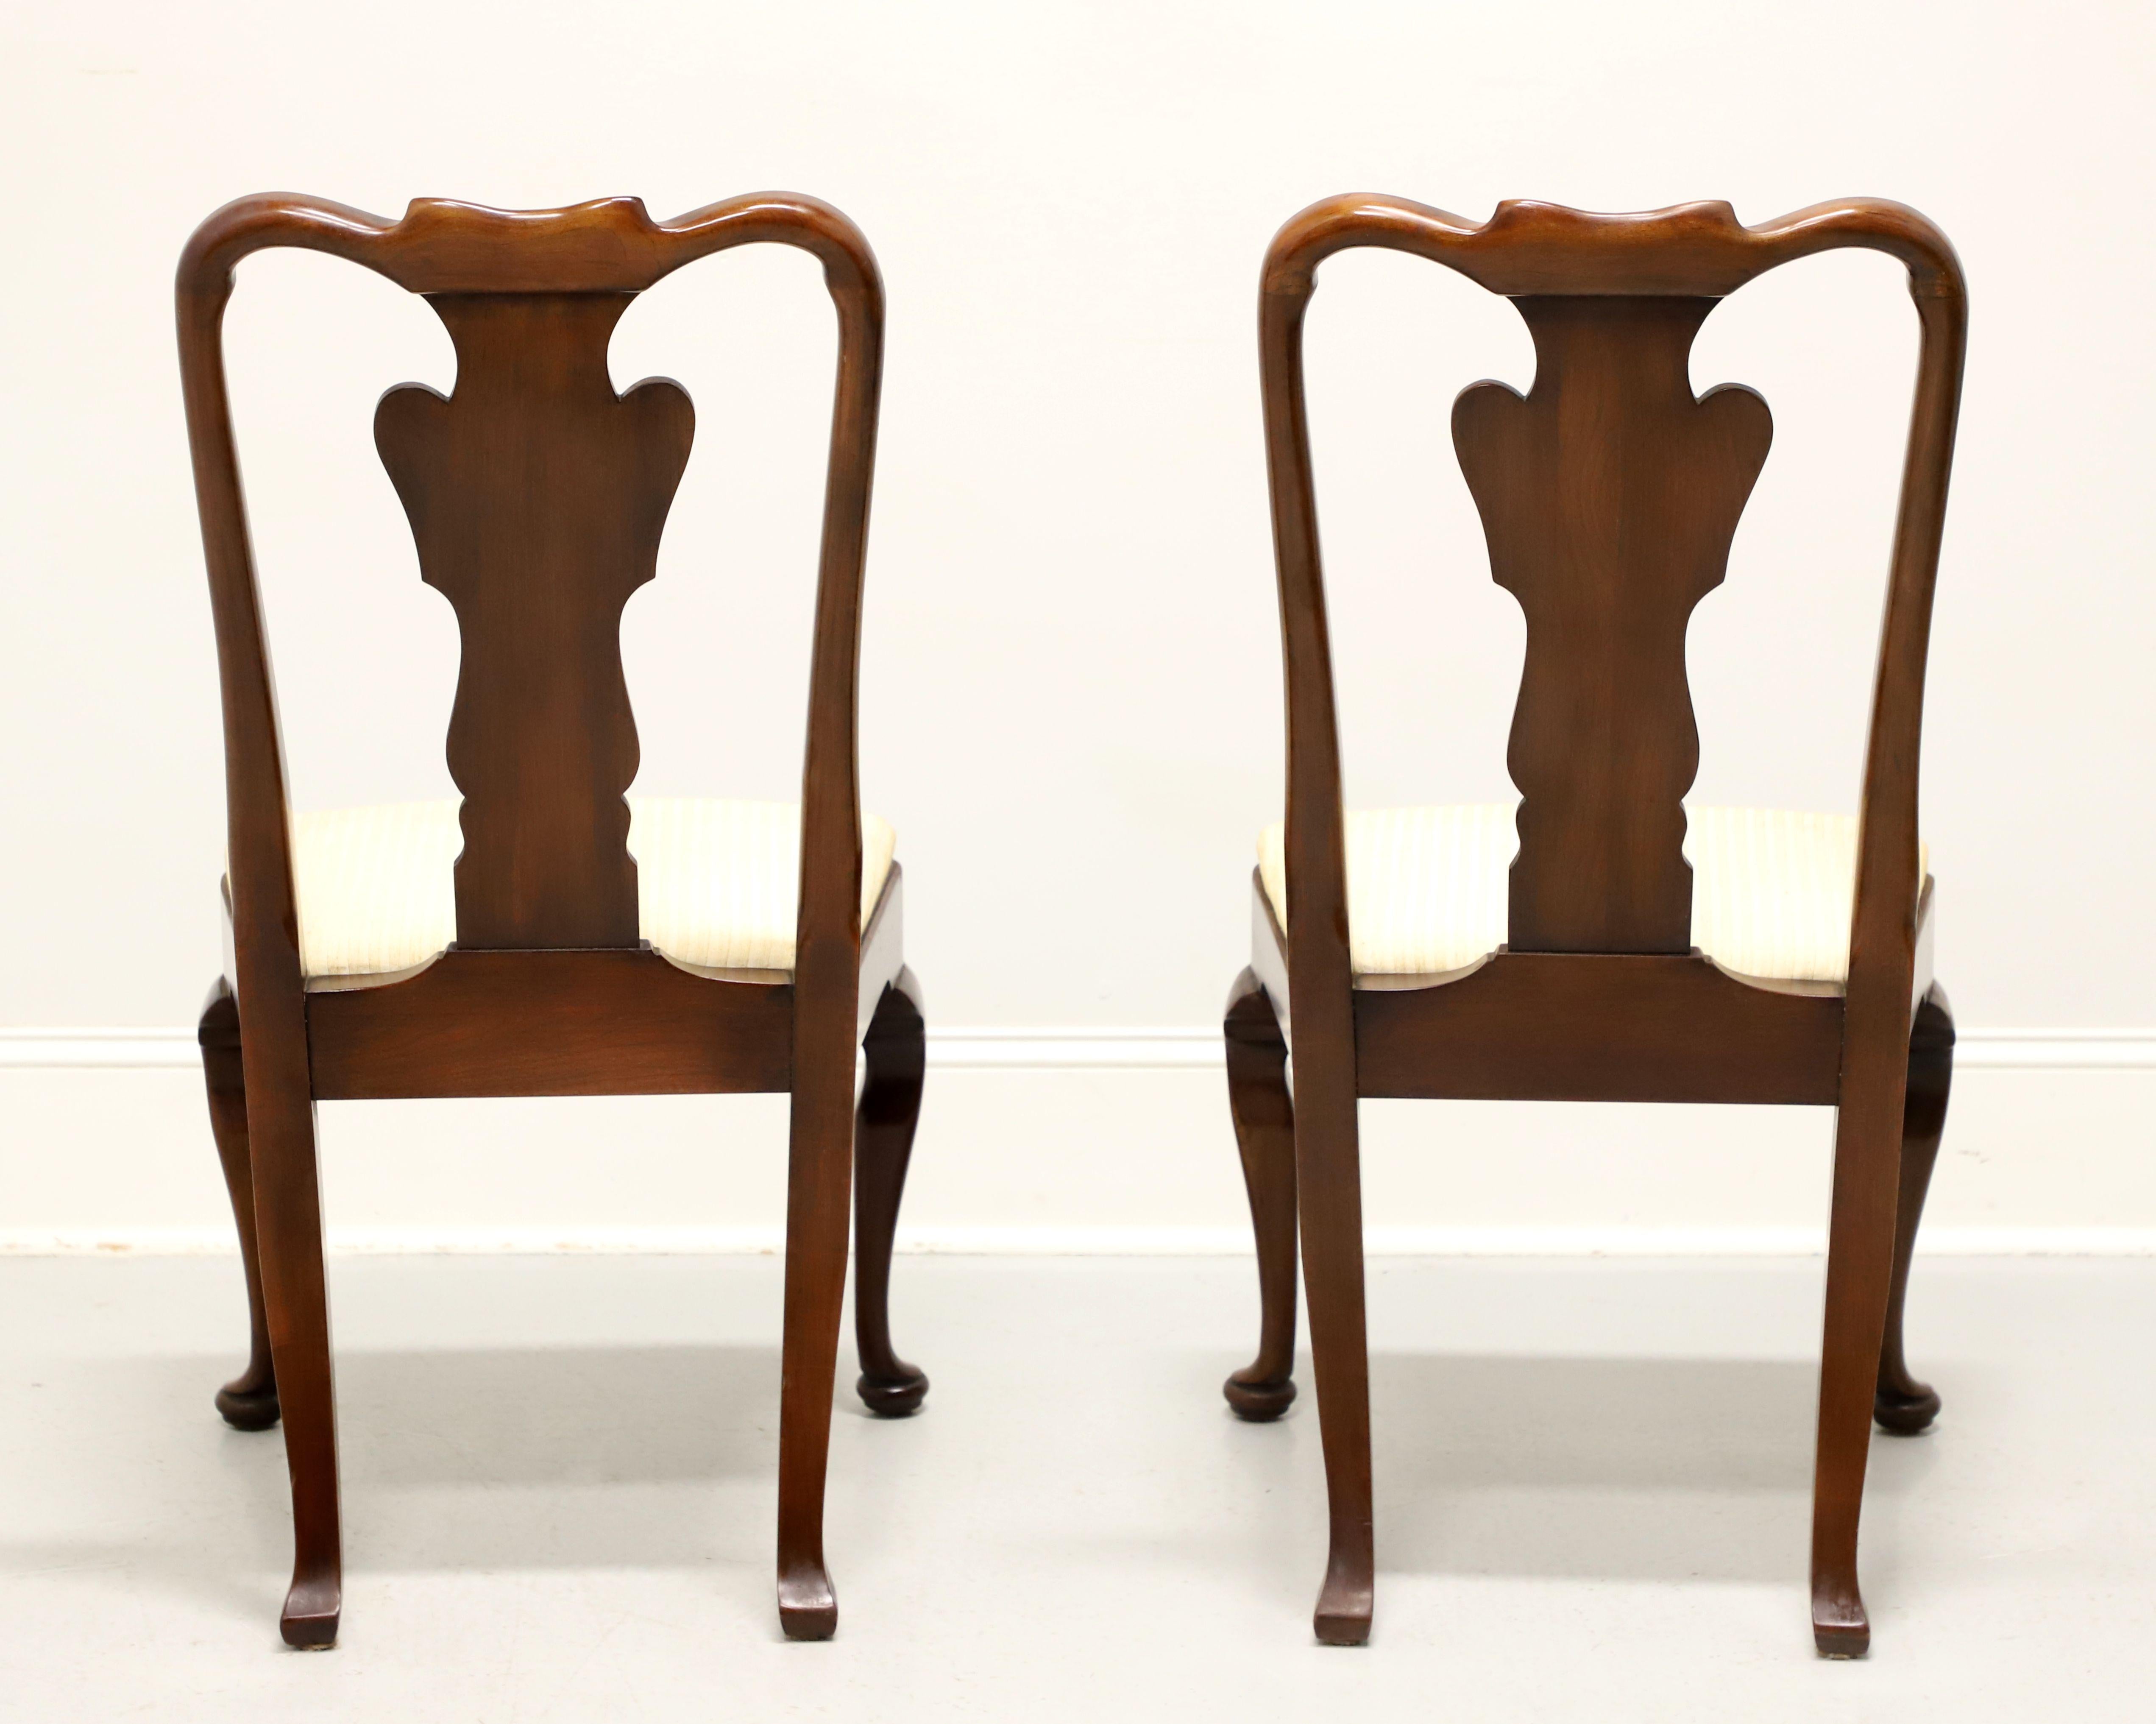 STATTON Old Towne Cherry Queen Anne Dining Side Chairs - Pair A In Good Condition For Sale In Charlotte, NC